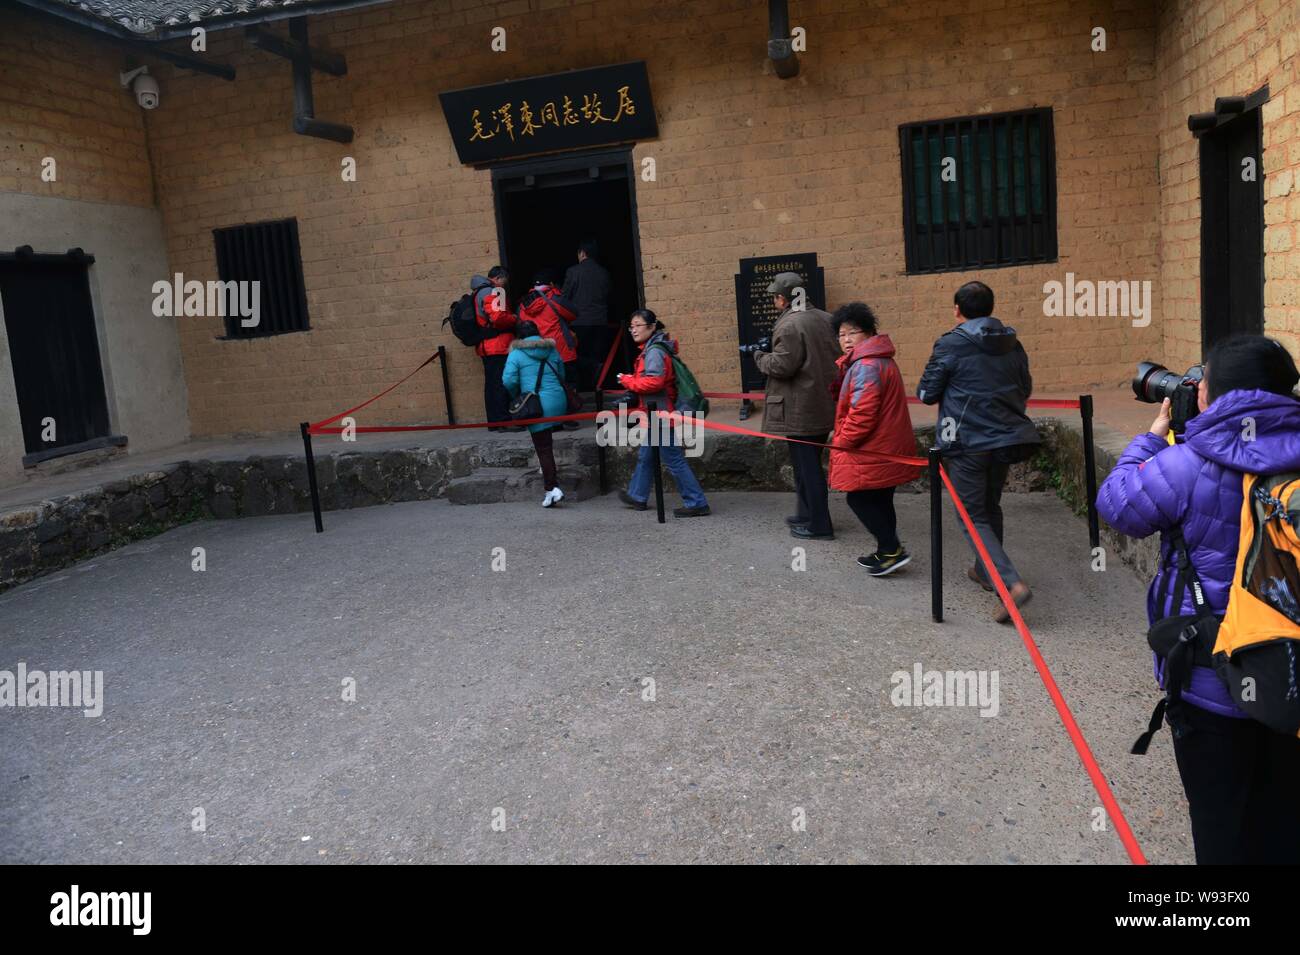 People visit the former residence of Mao Zedong to commemorate the 120th anniversary of the birth of Mao in Shaoshan, Xiangtan city, central Chinas Hu Stock Photo